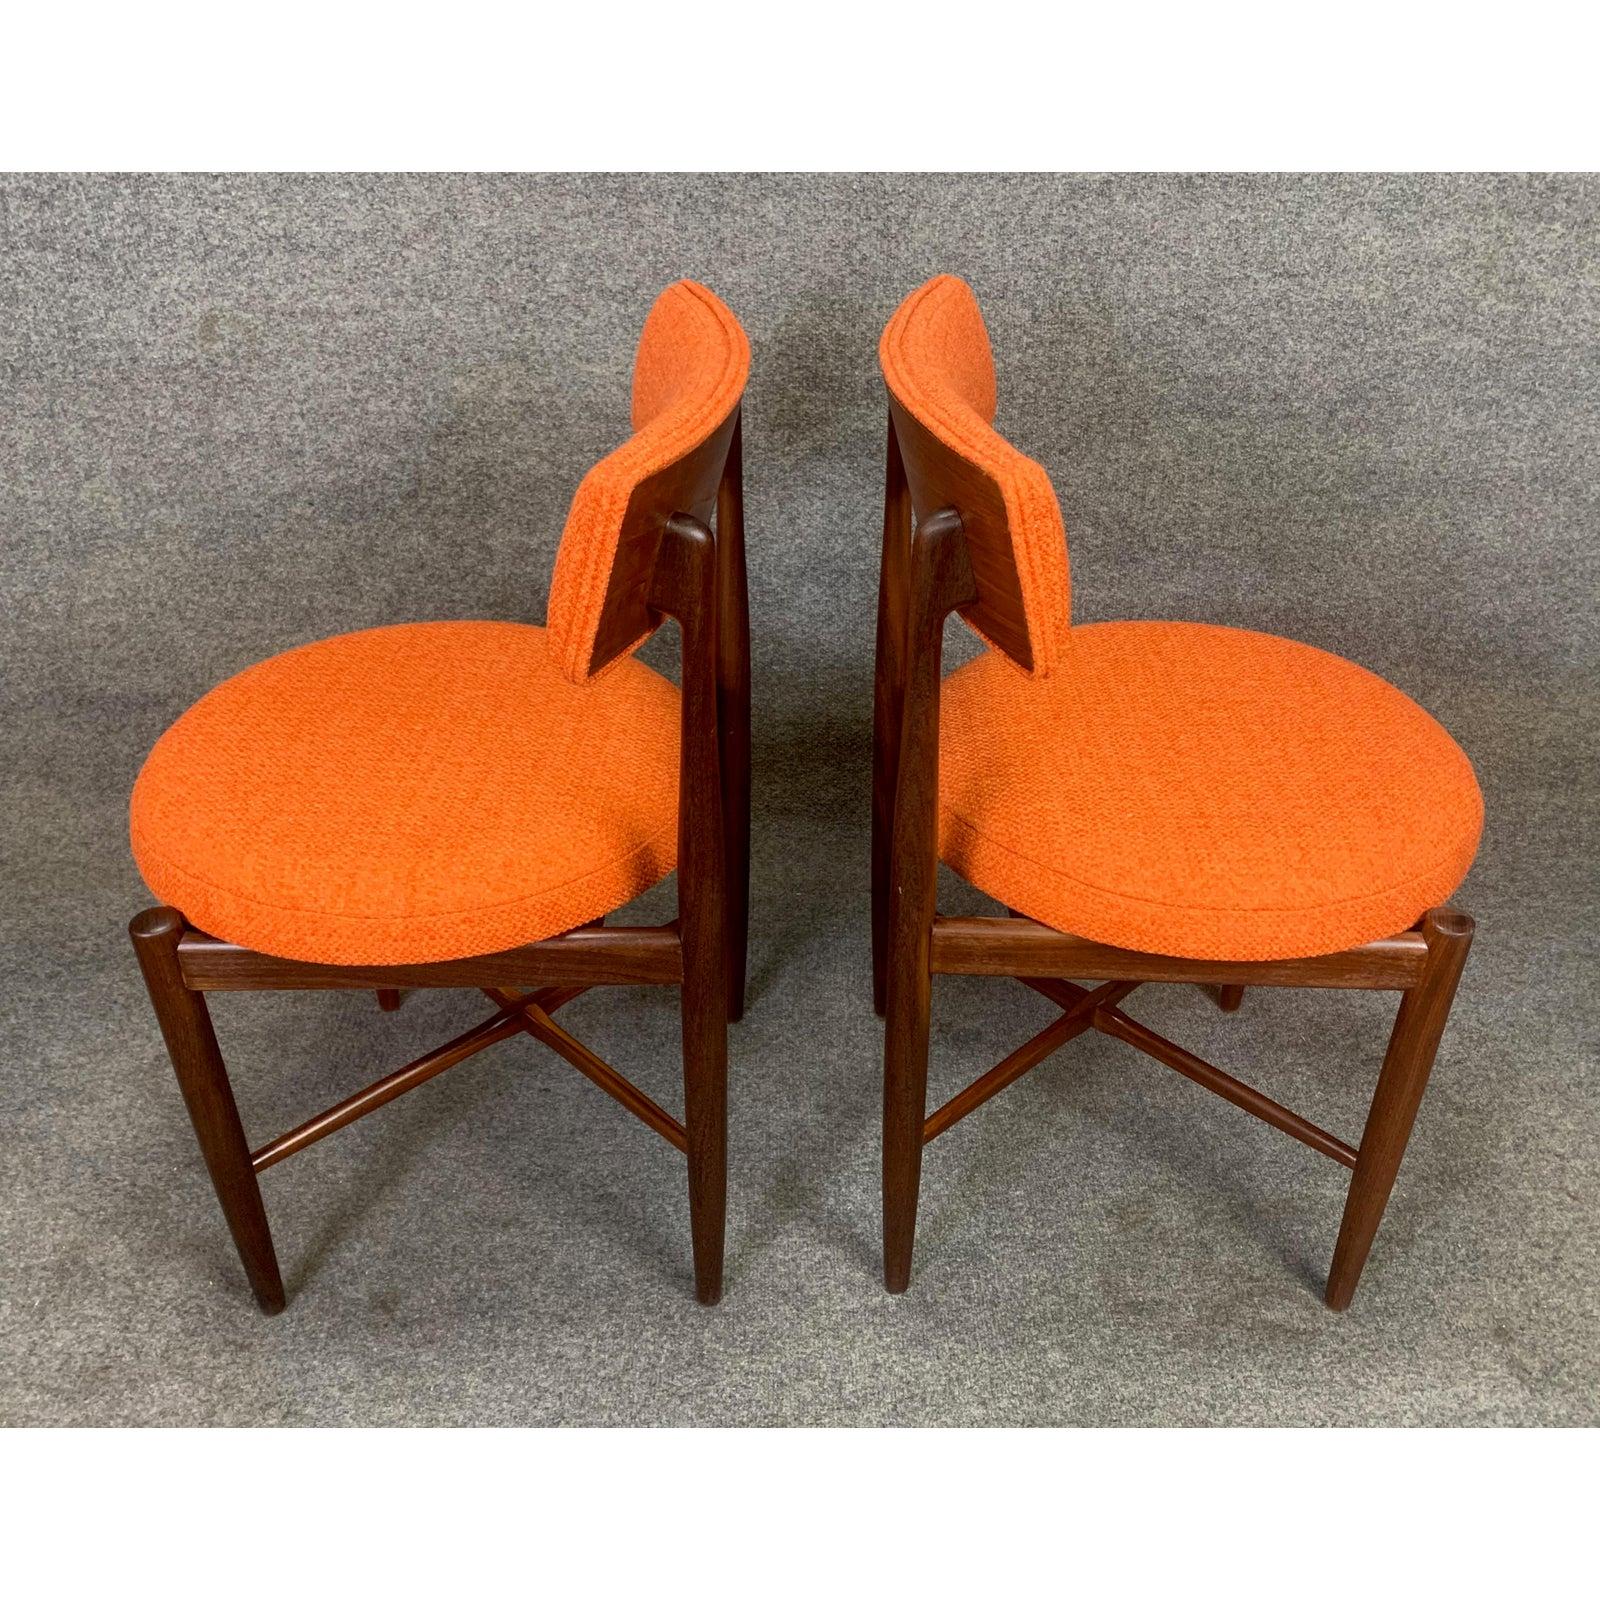 Pair of Vintage British Mid-Century Modern Teak Accent Chairs by G Plan For Sale 1